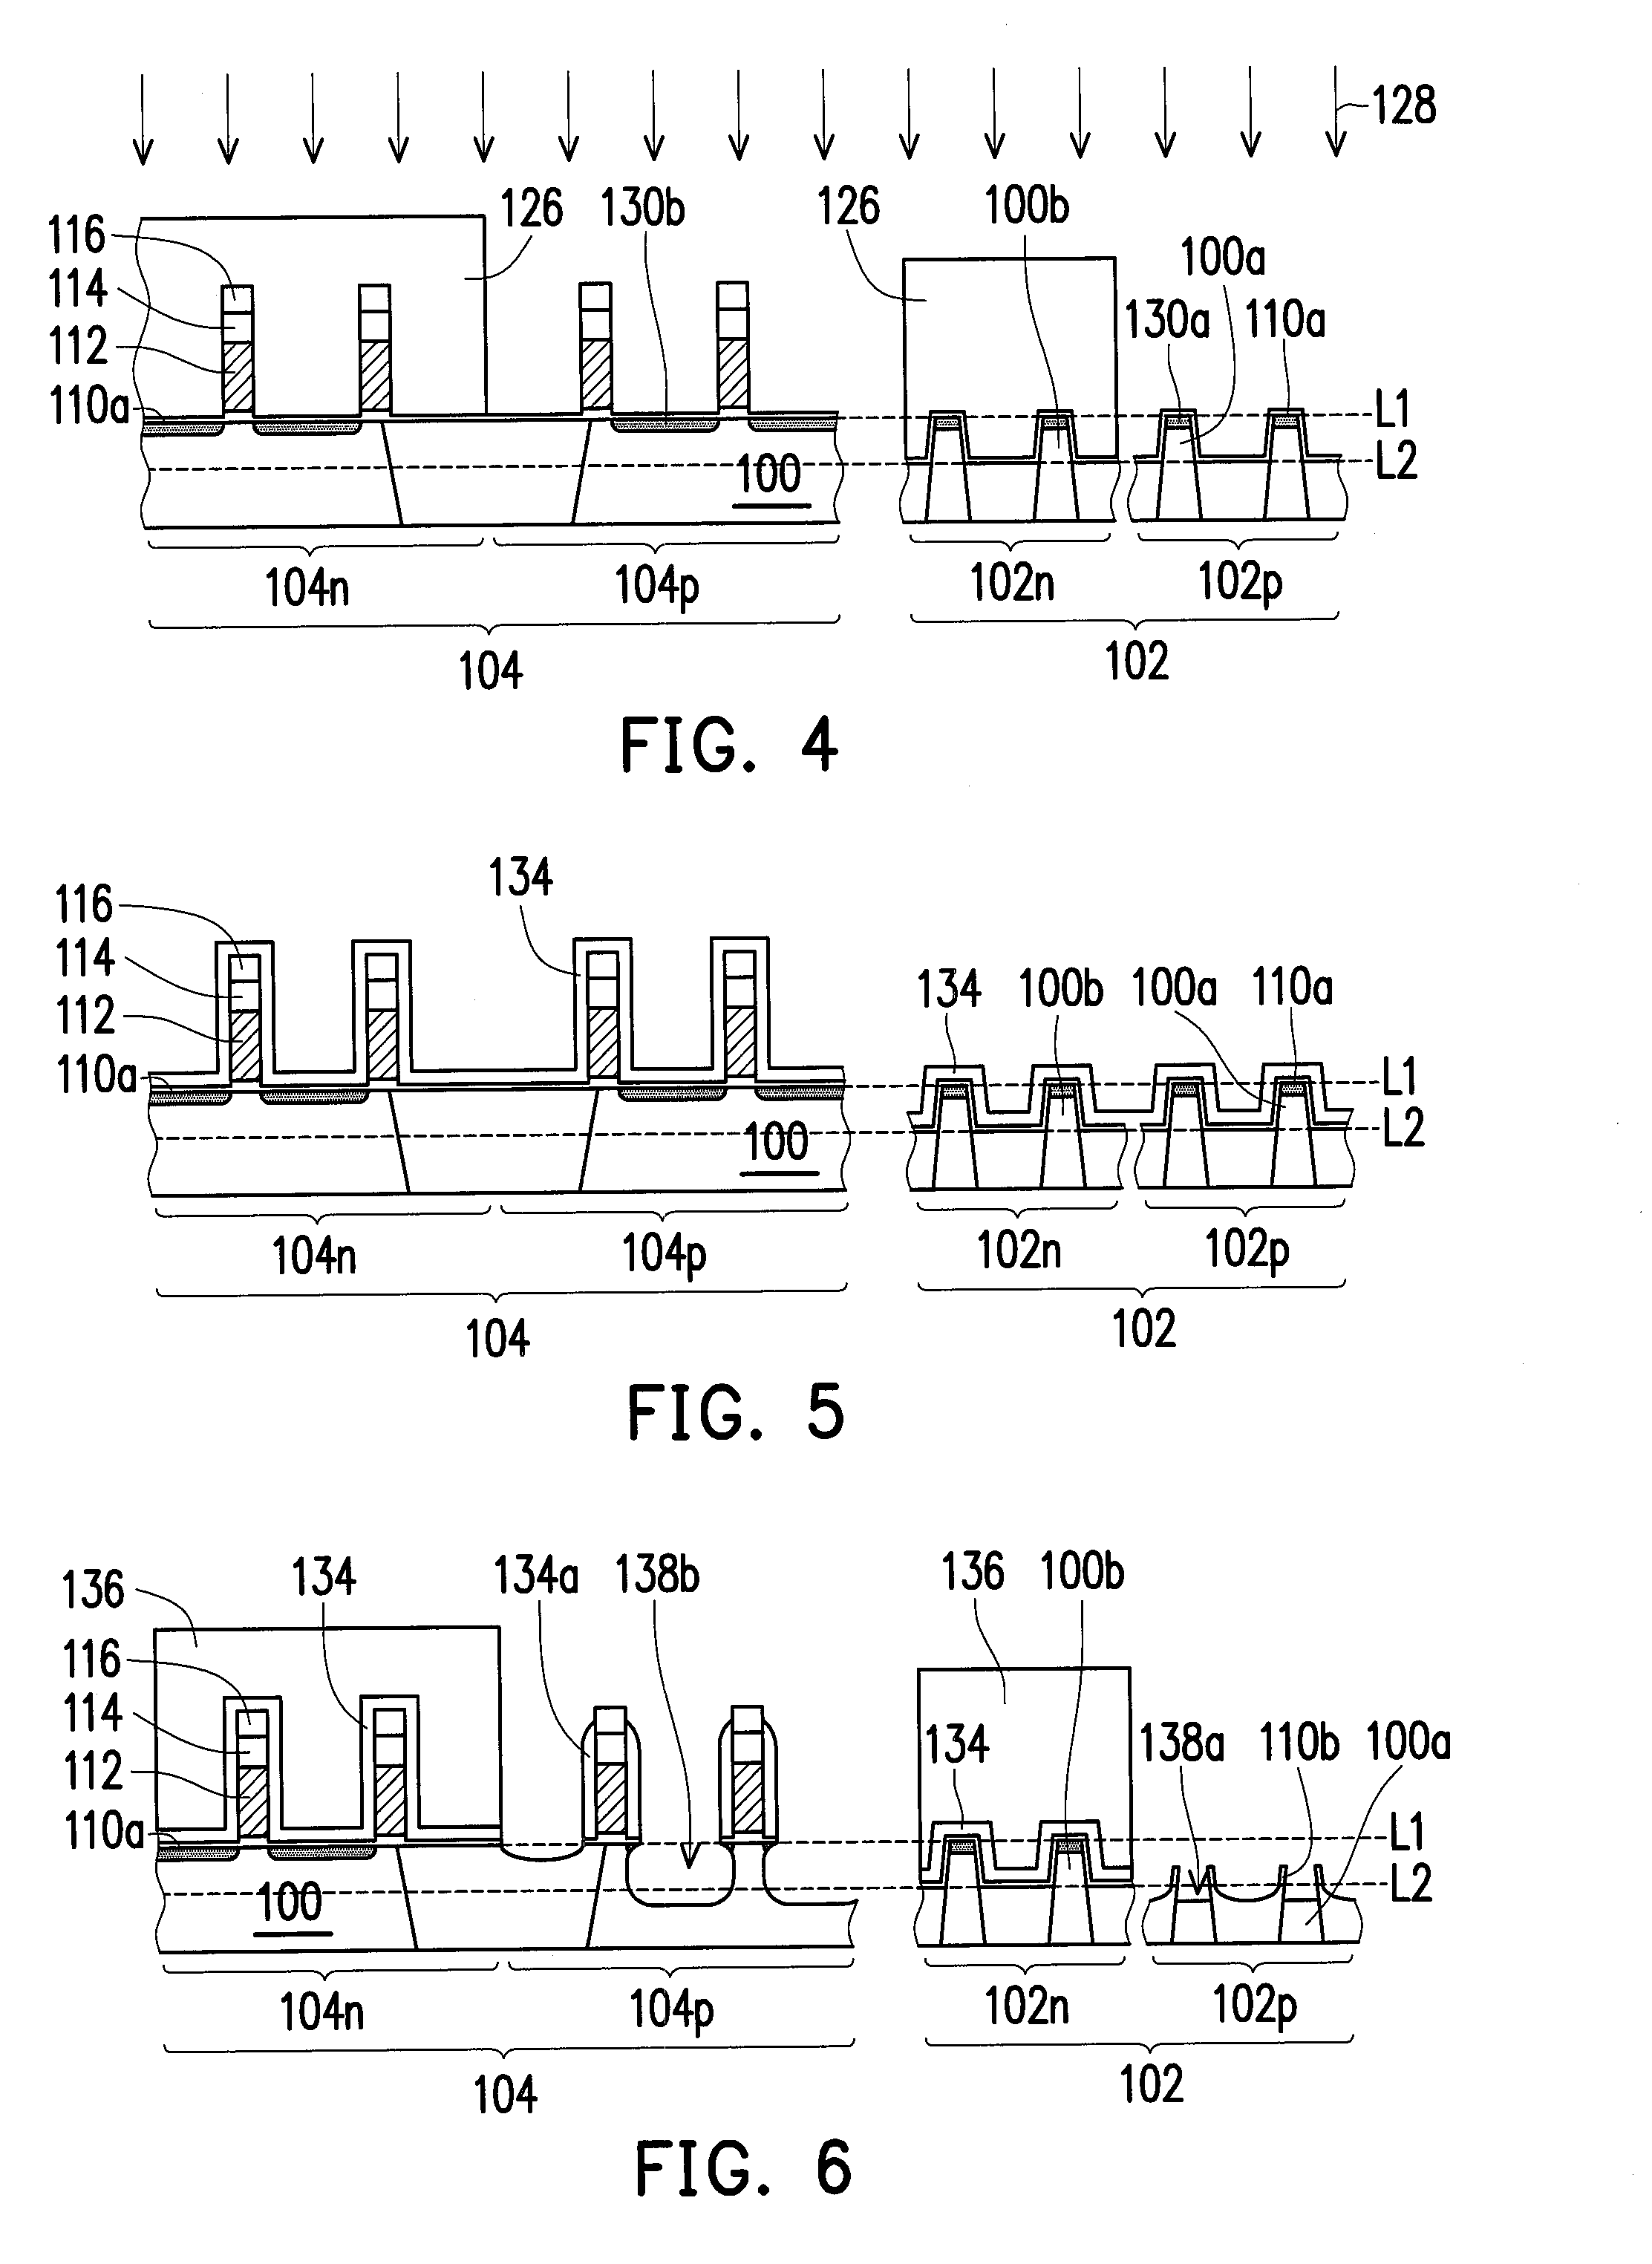 PROCESS FOR FABRICATING FIN-TYPE FIELD EFFECT TRANSISTOR (FinFET) STRUCTURE AND PRODUCT THEREOF